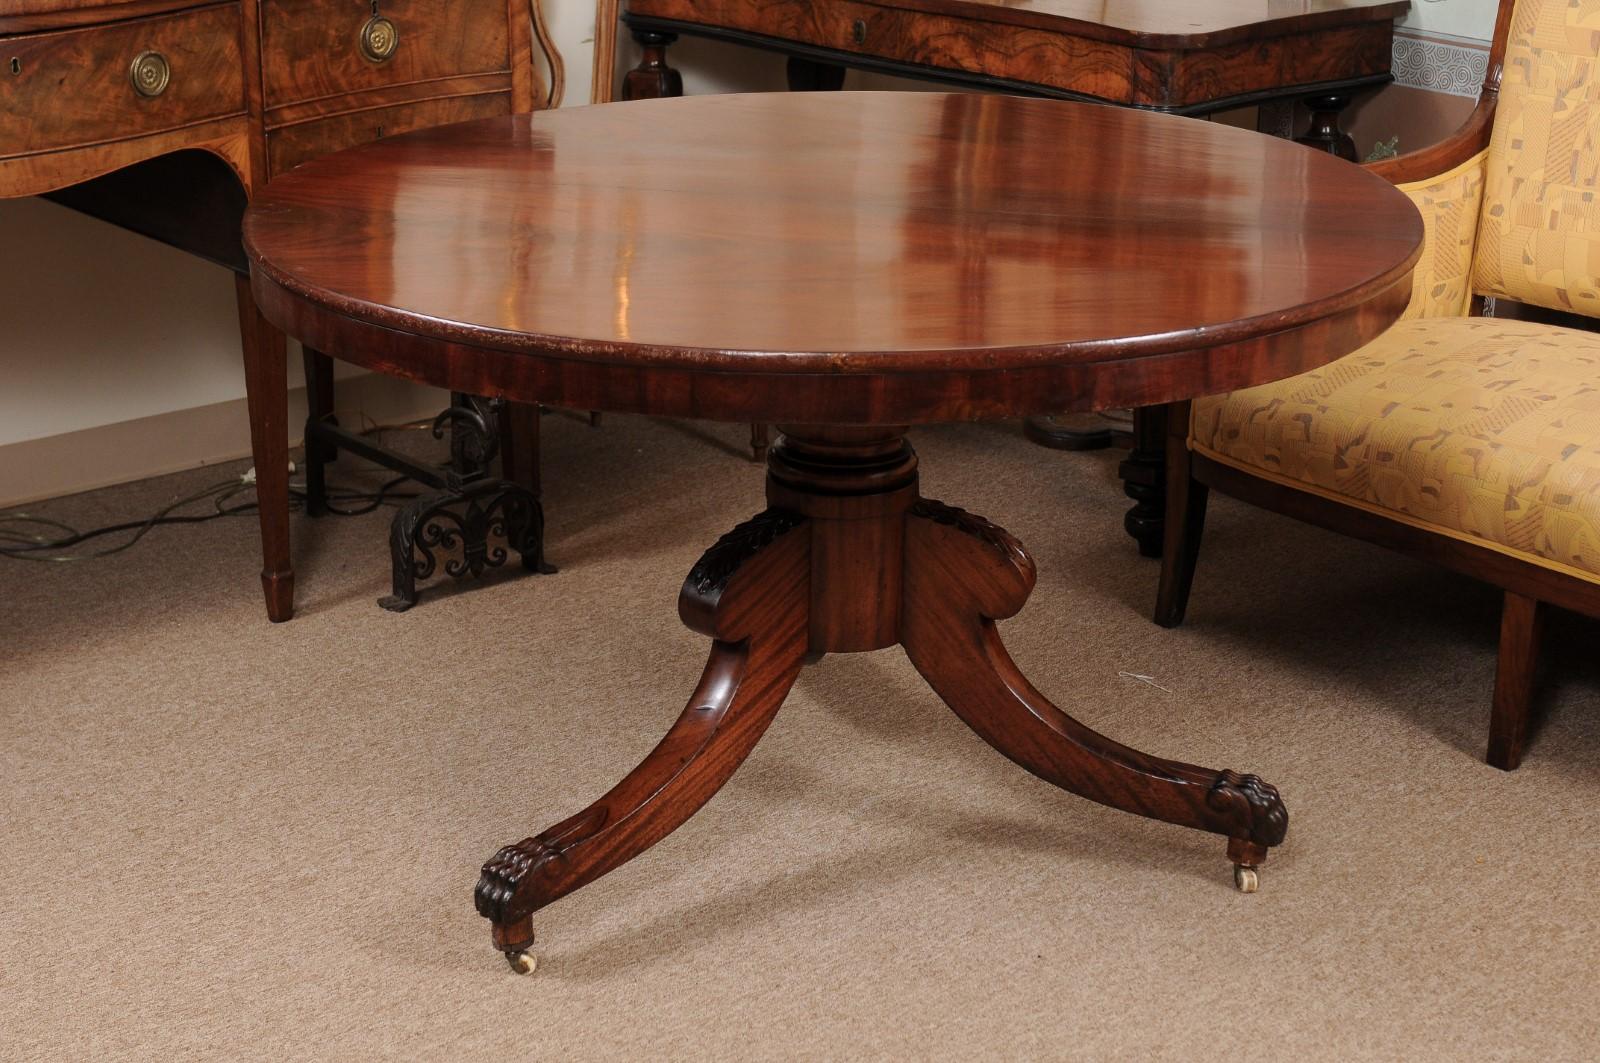 19th Century English Mahogany Center Table with Pedestal Base & 3 Splayed Legs  For Sale 3